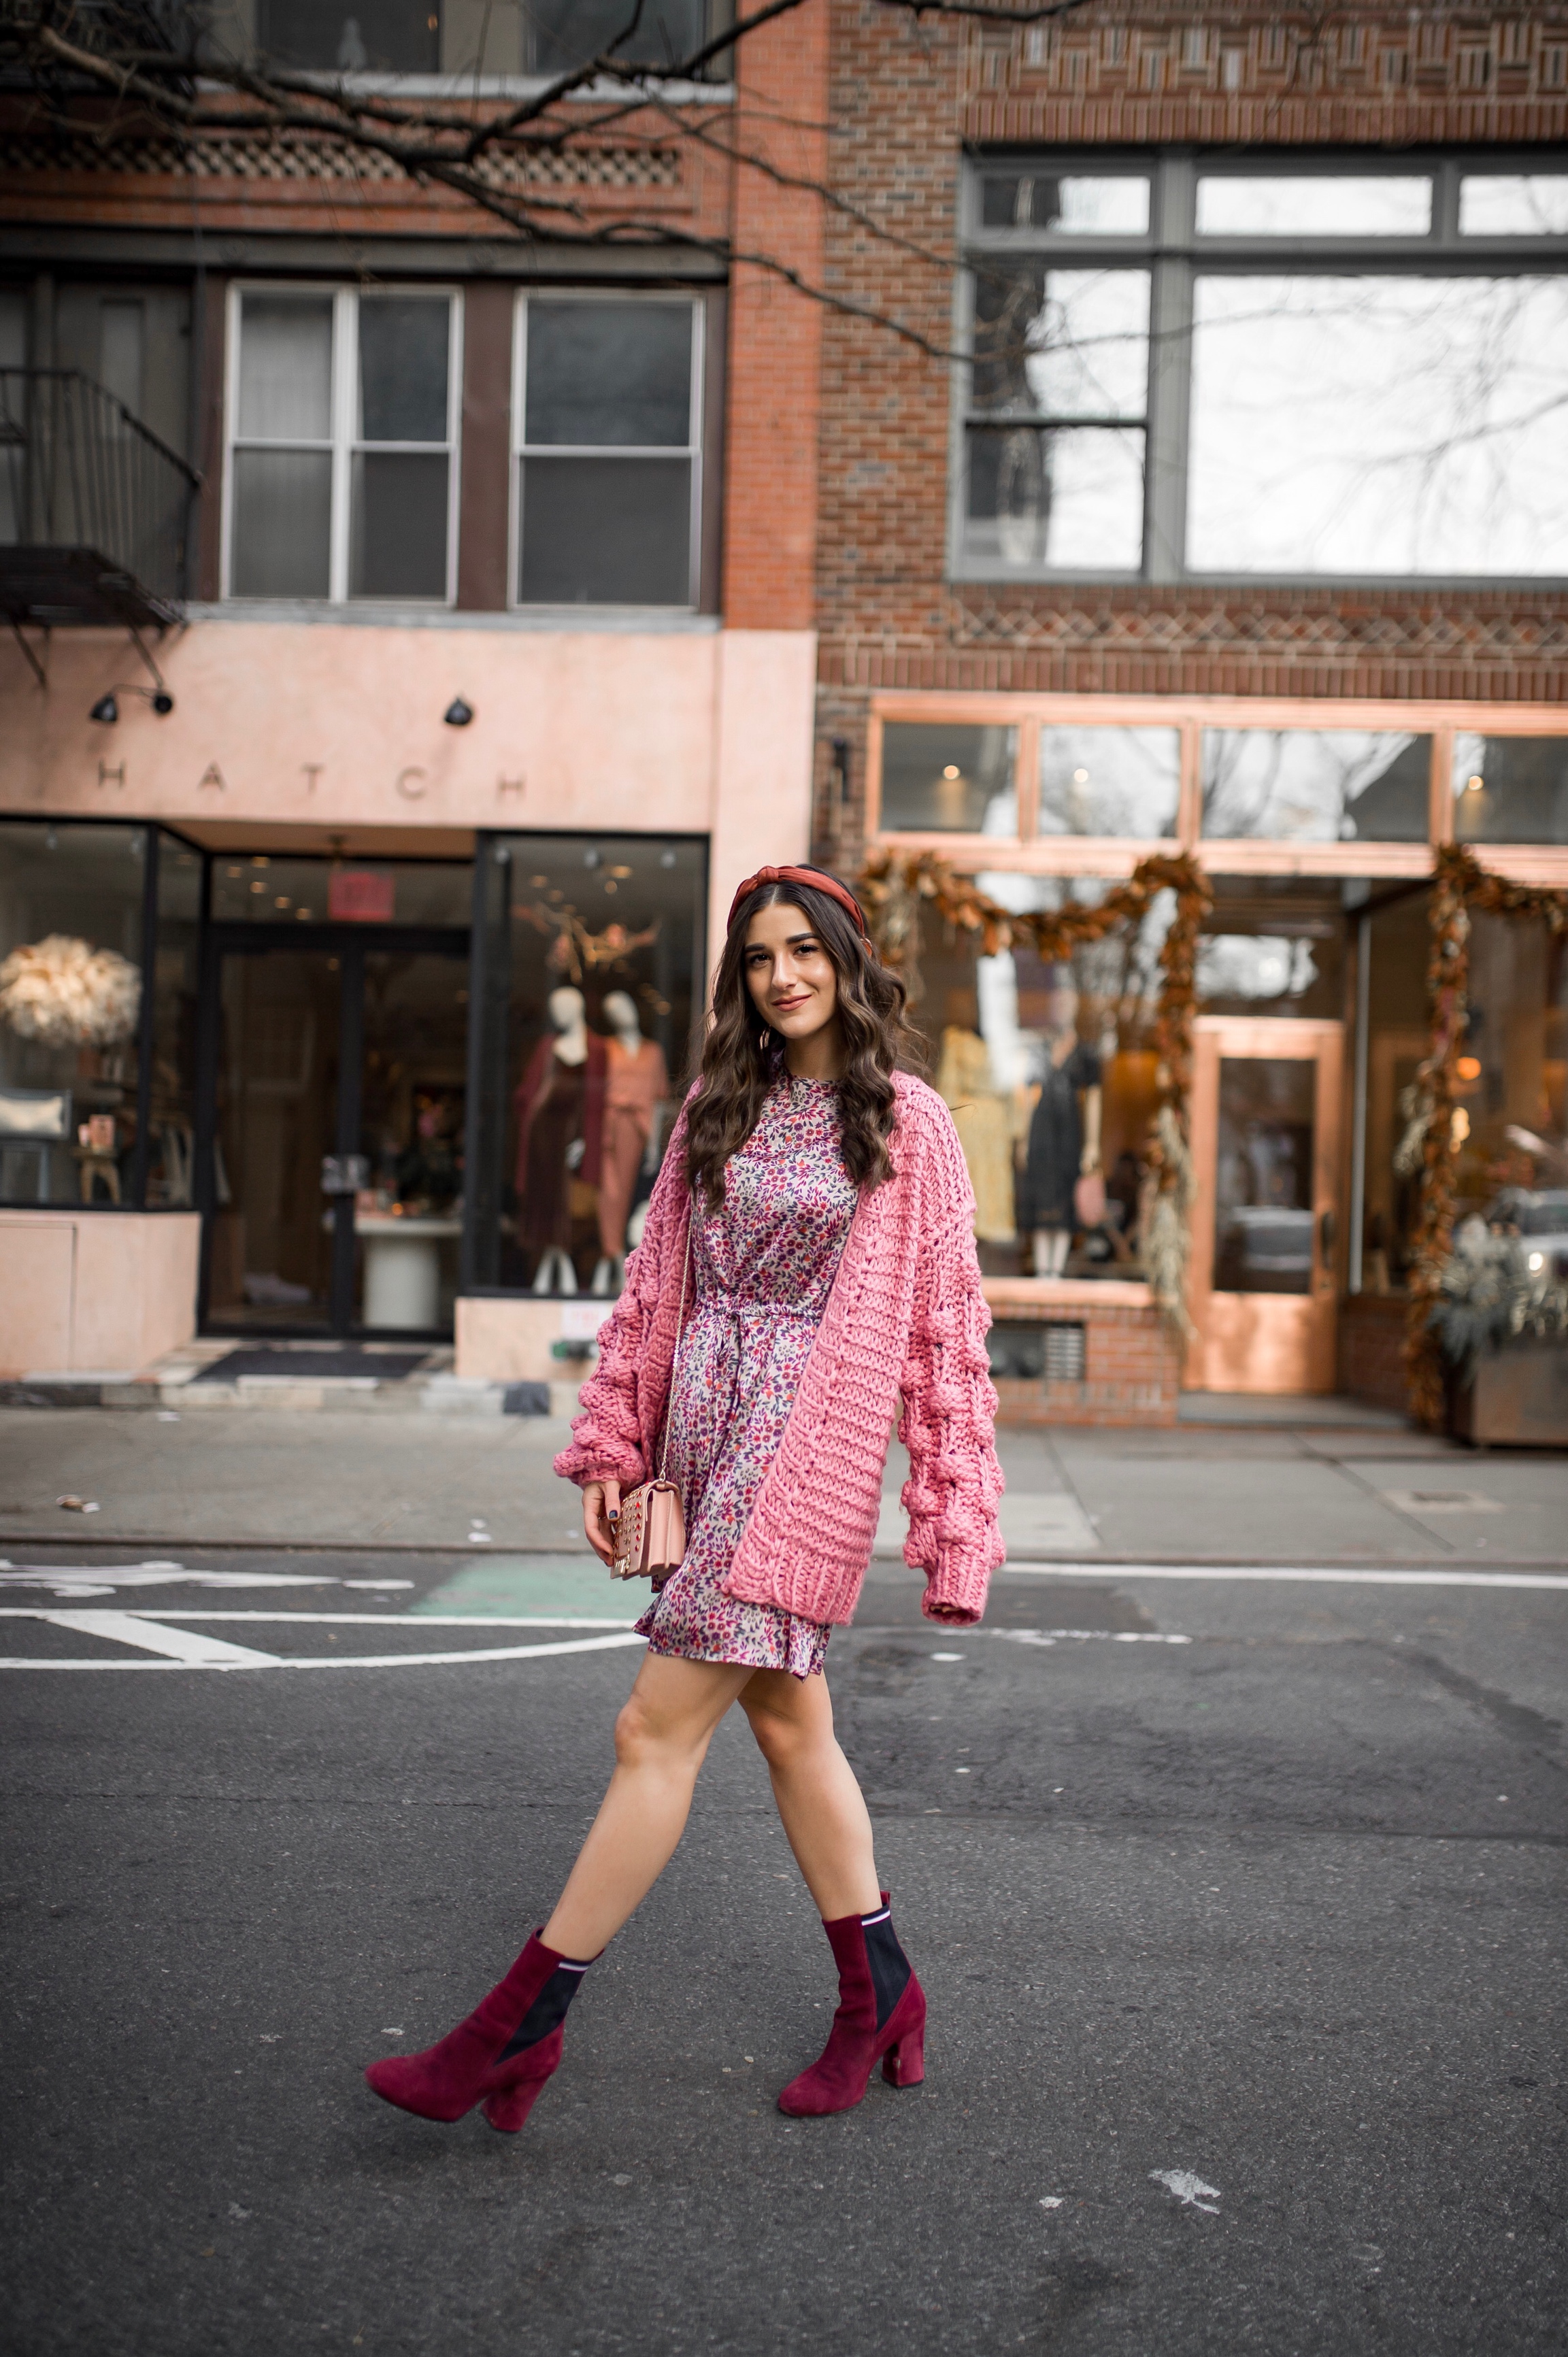 How Being In A Miserable Job Shaped My Entire Career Silk Floral Dress + Pink Pom Pom Sweater Esther Santer Fashion Blog NYC Street Style Blogger Outfit OOTD Trendy Shopping Mango Sale Winter How To  Wear Maroon Velvet Booties Zac Posen Swarovski Bag.jpg